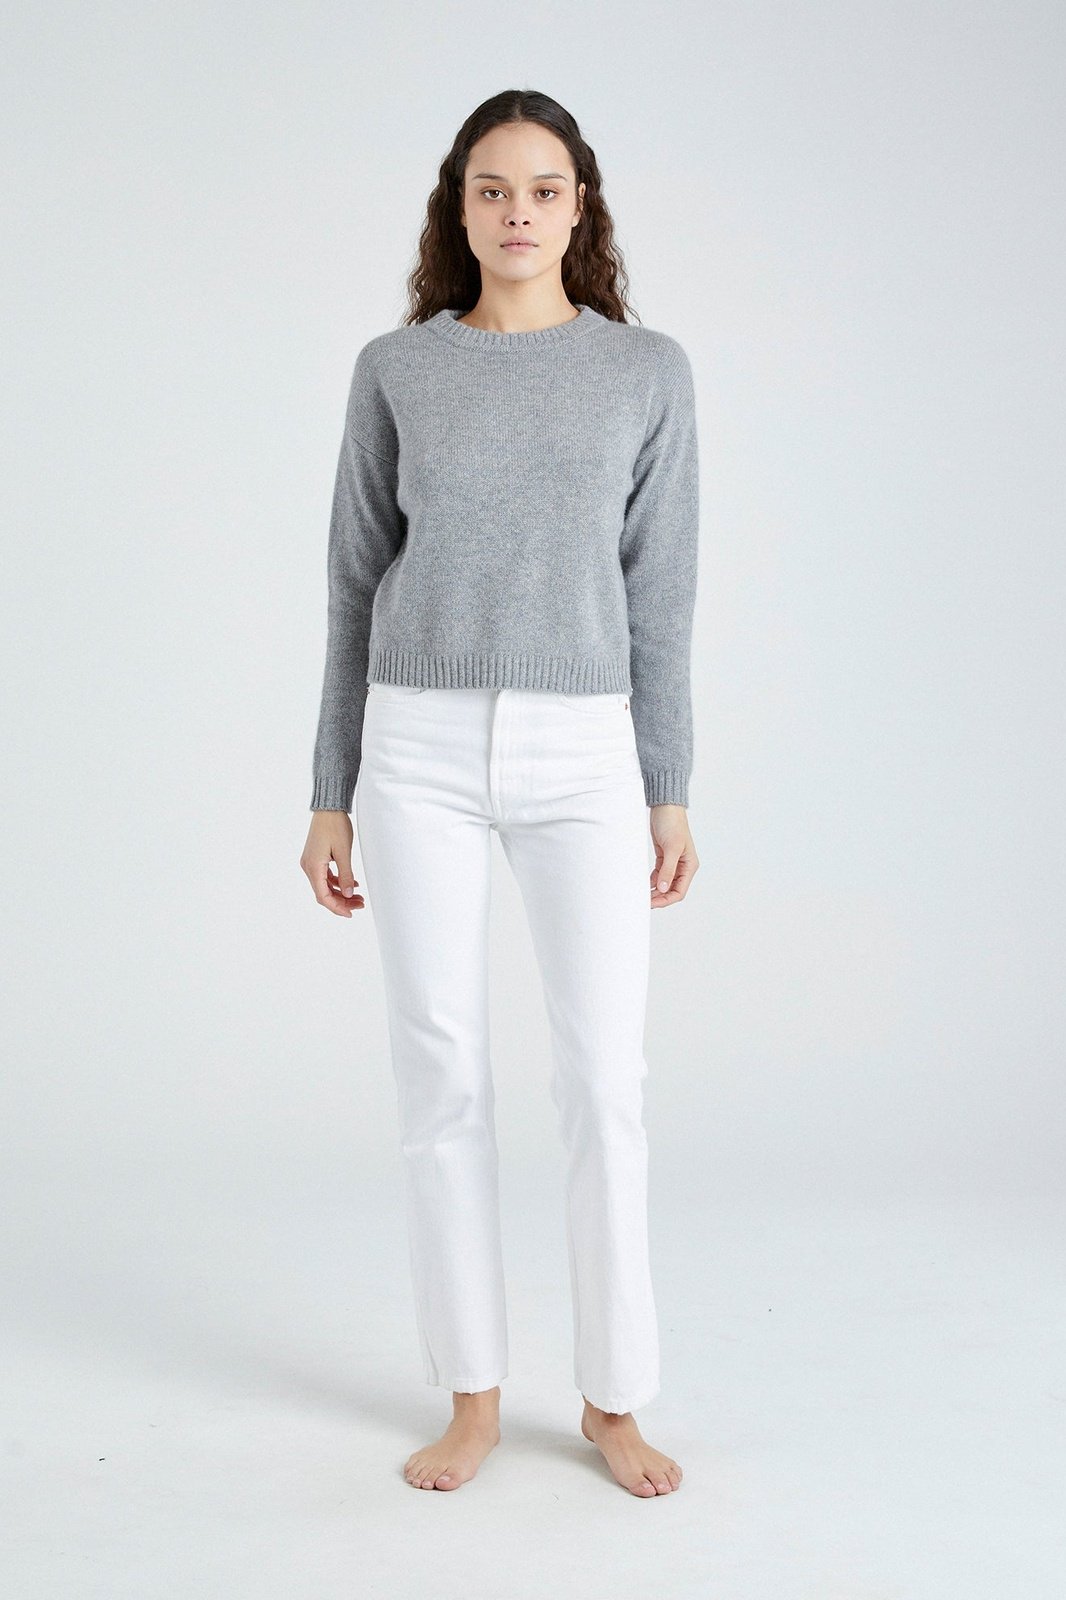 +Beryll Holly Cashmere Sweater | Pebble Gray - +Beryll Holly Cashmere Sweater | Shell Gray - +Beryll Worn By Good People